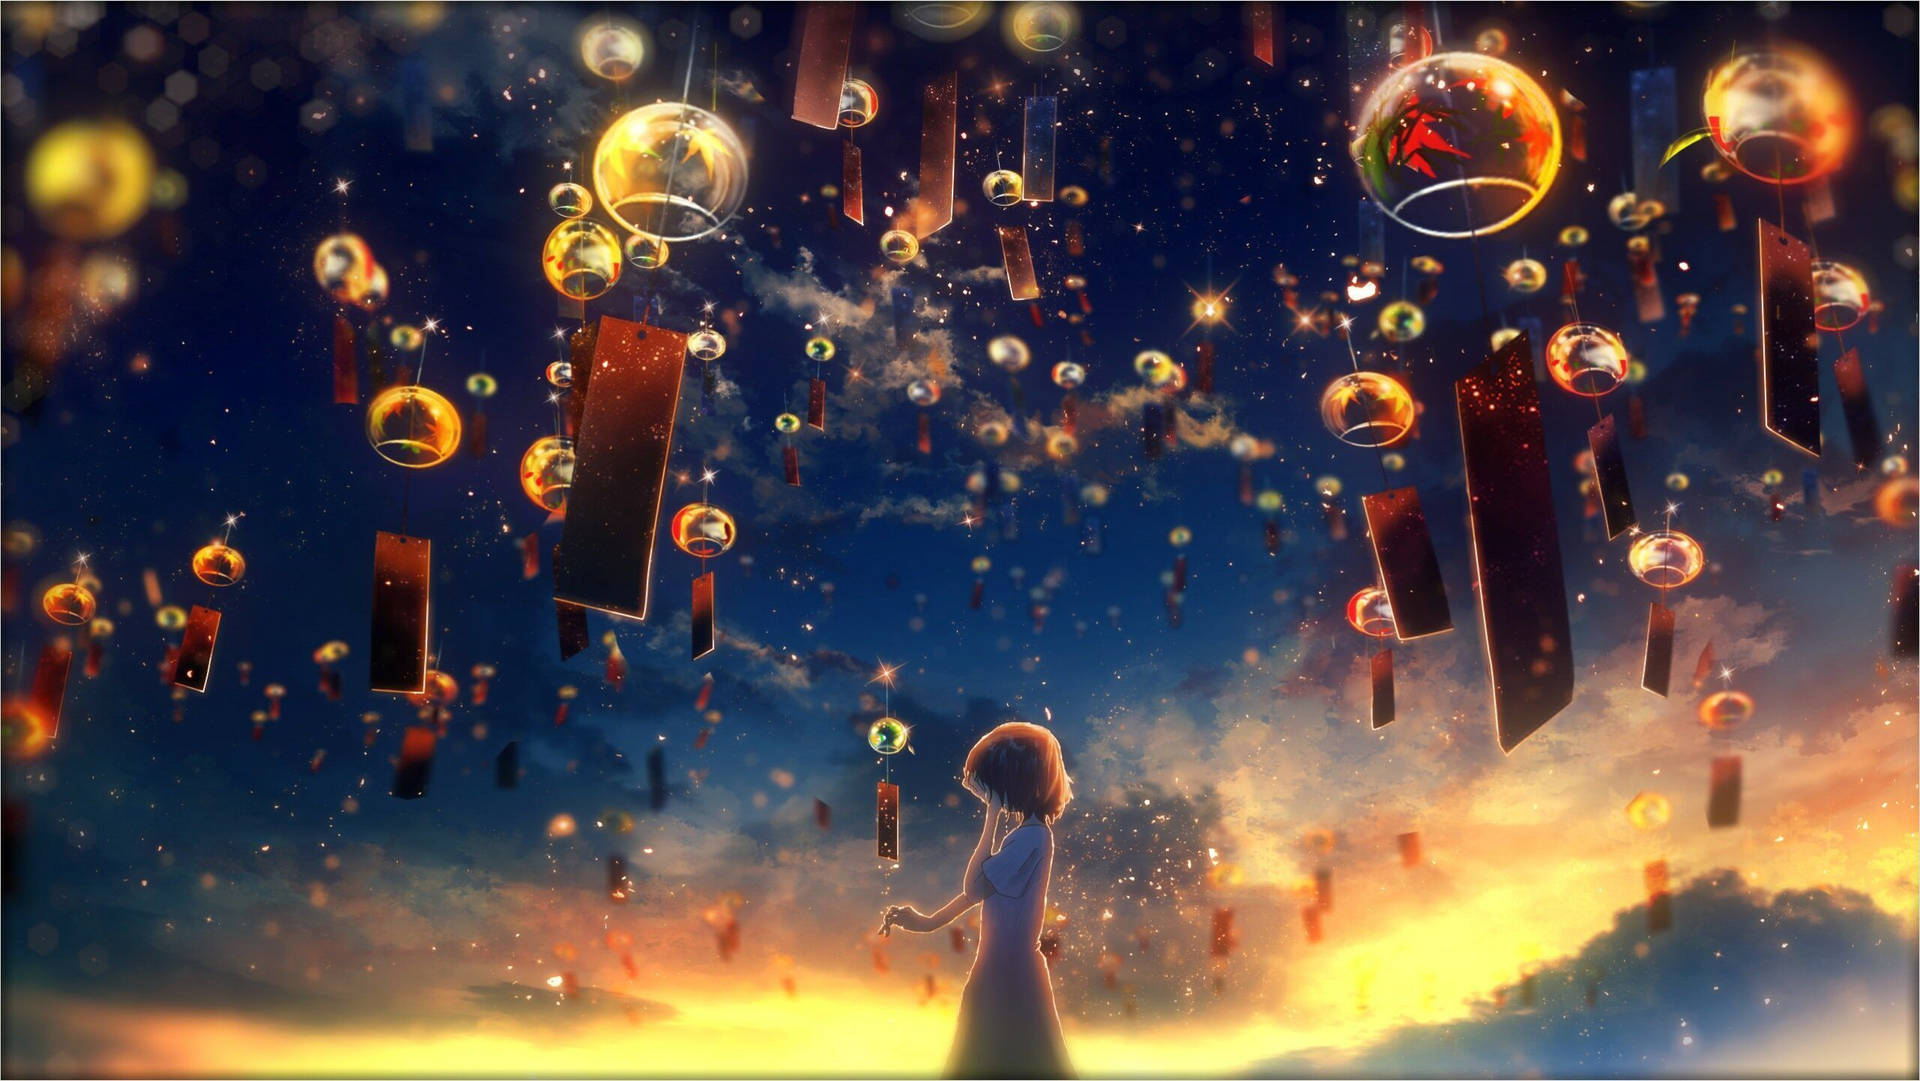 Download 4k Moving Lanterns In The Sky Wallpaper 